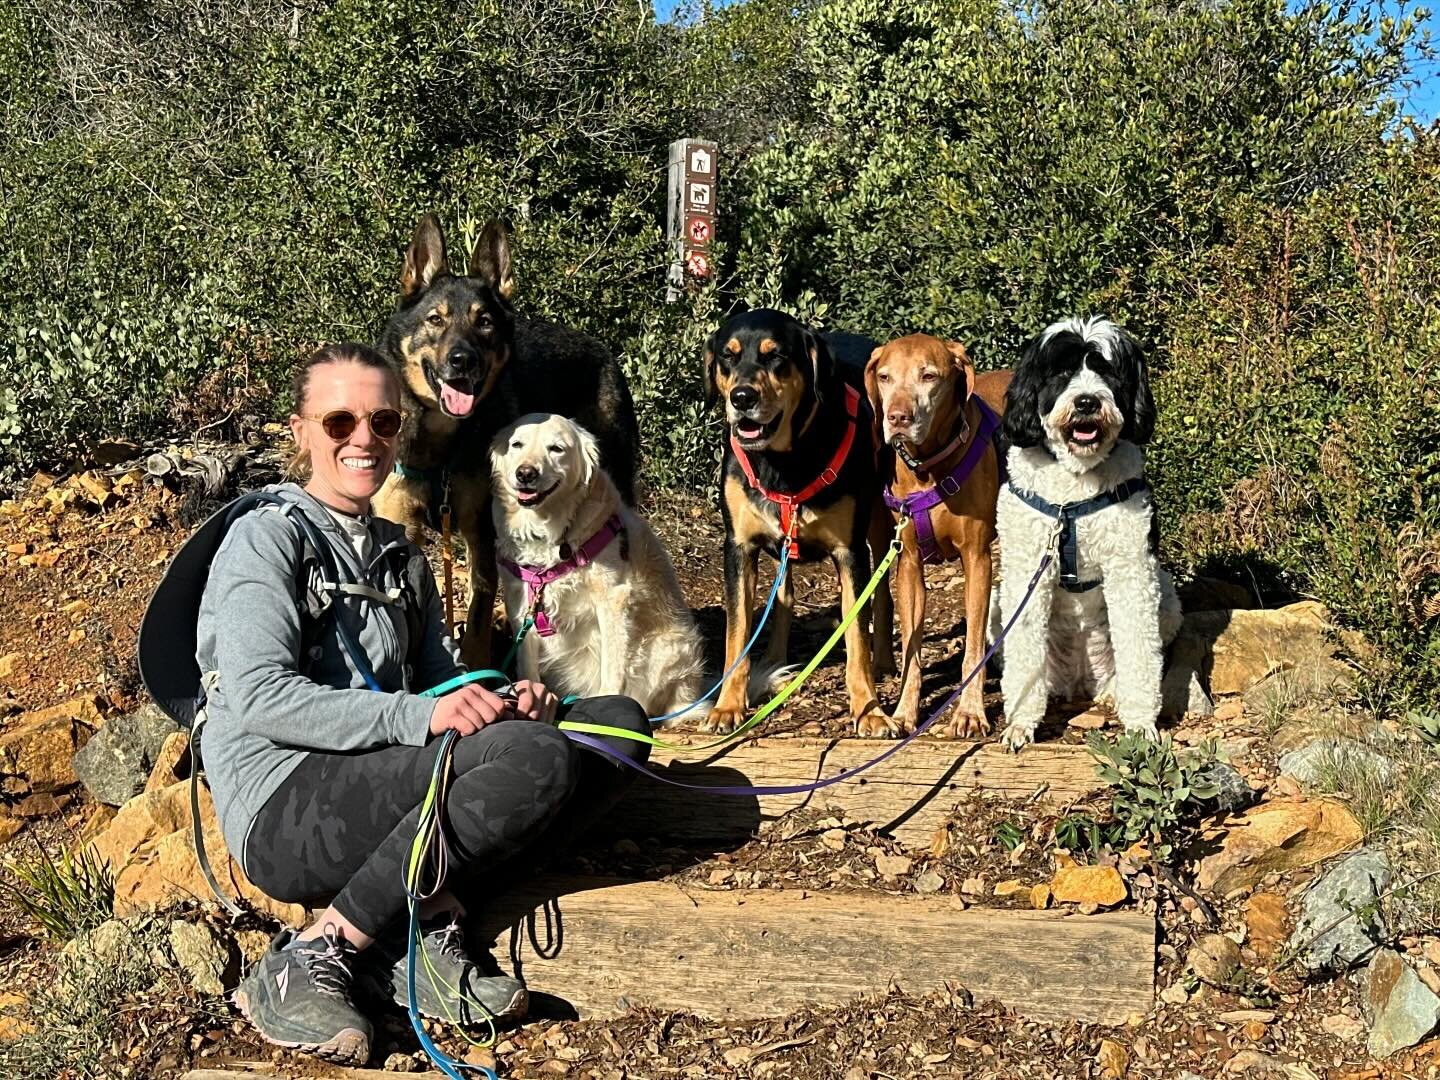 Happy weekend everyone. So grateful I get to spend time with my four-legged friends. They bring so much joy and meaning to my life. Dogs rule! #marincanineadventures #doglife #happydog #dogsofinsta #dogsofinstagram #dogohotography #marindogs #traildo